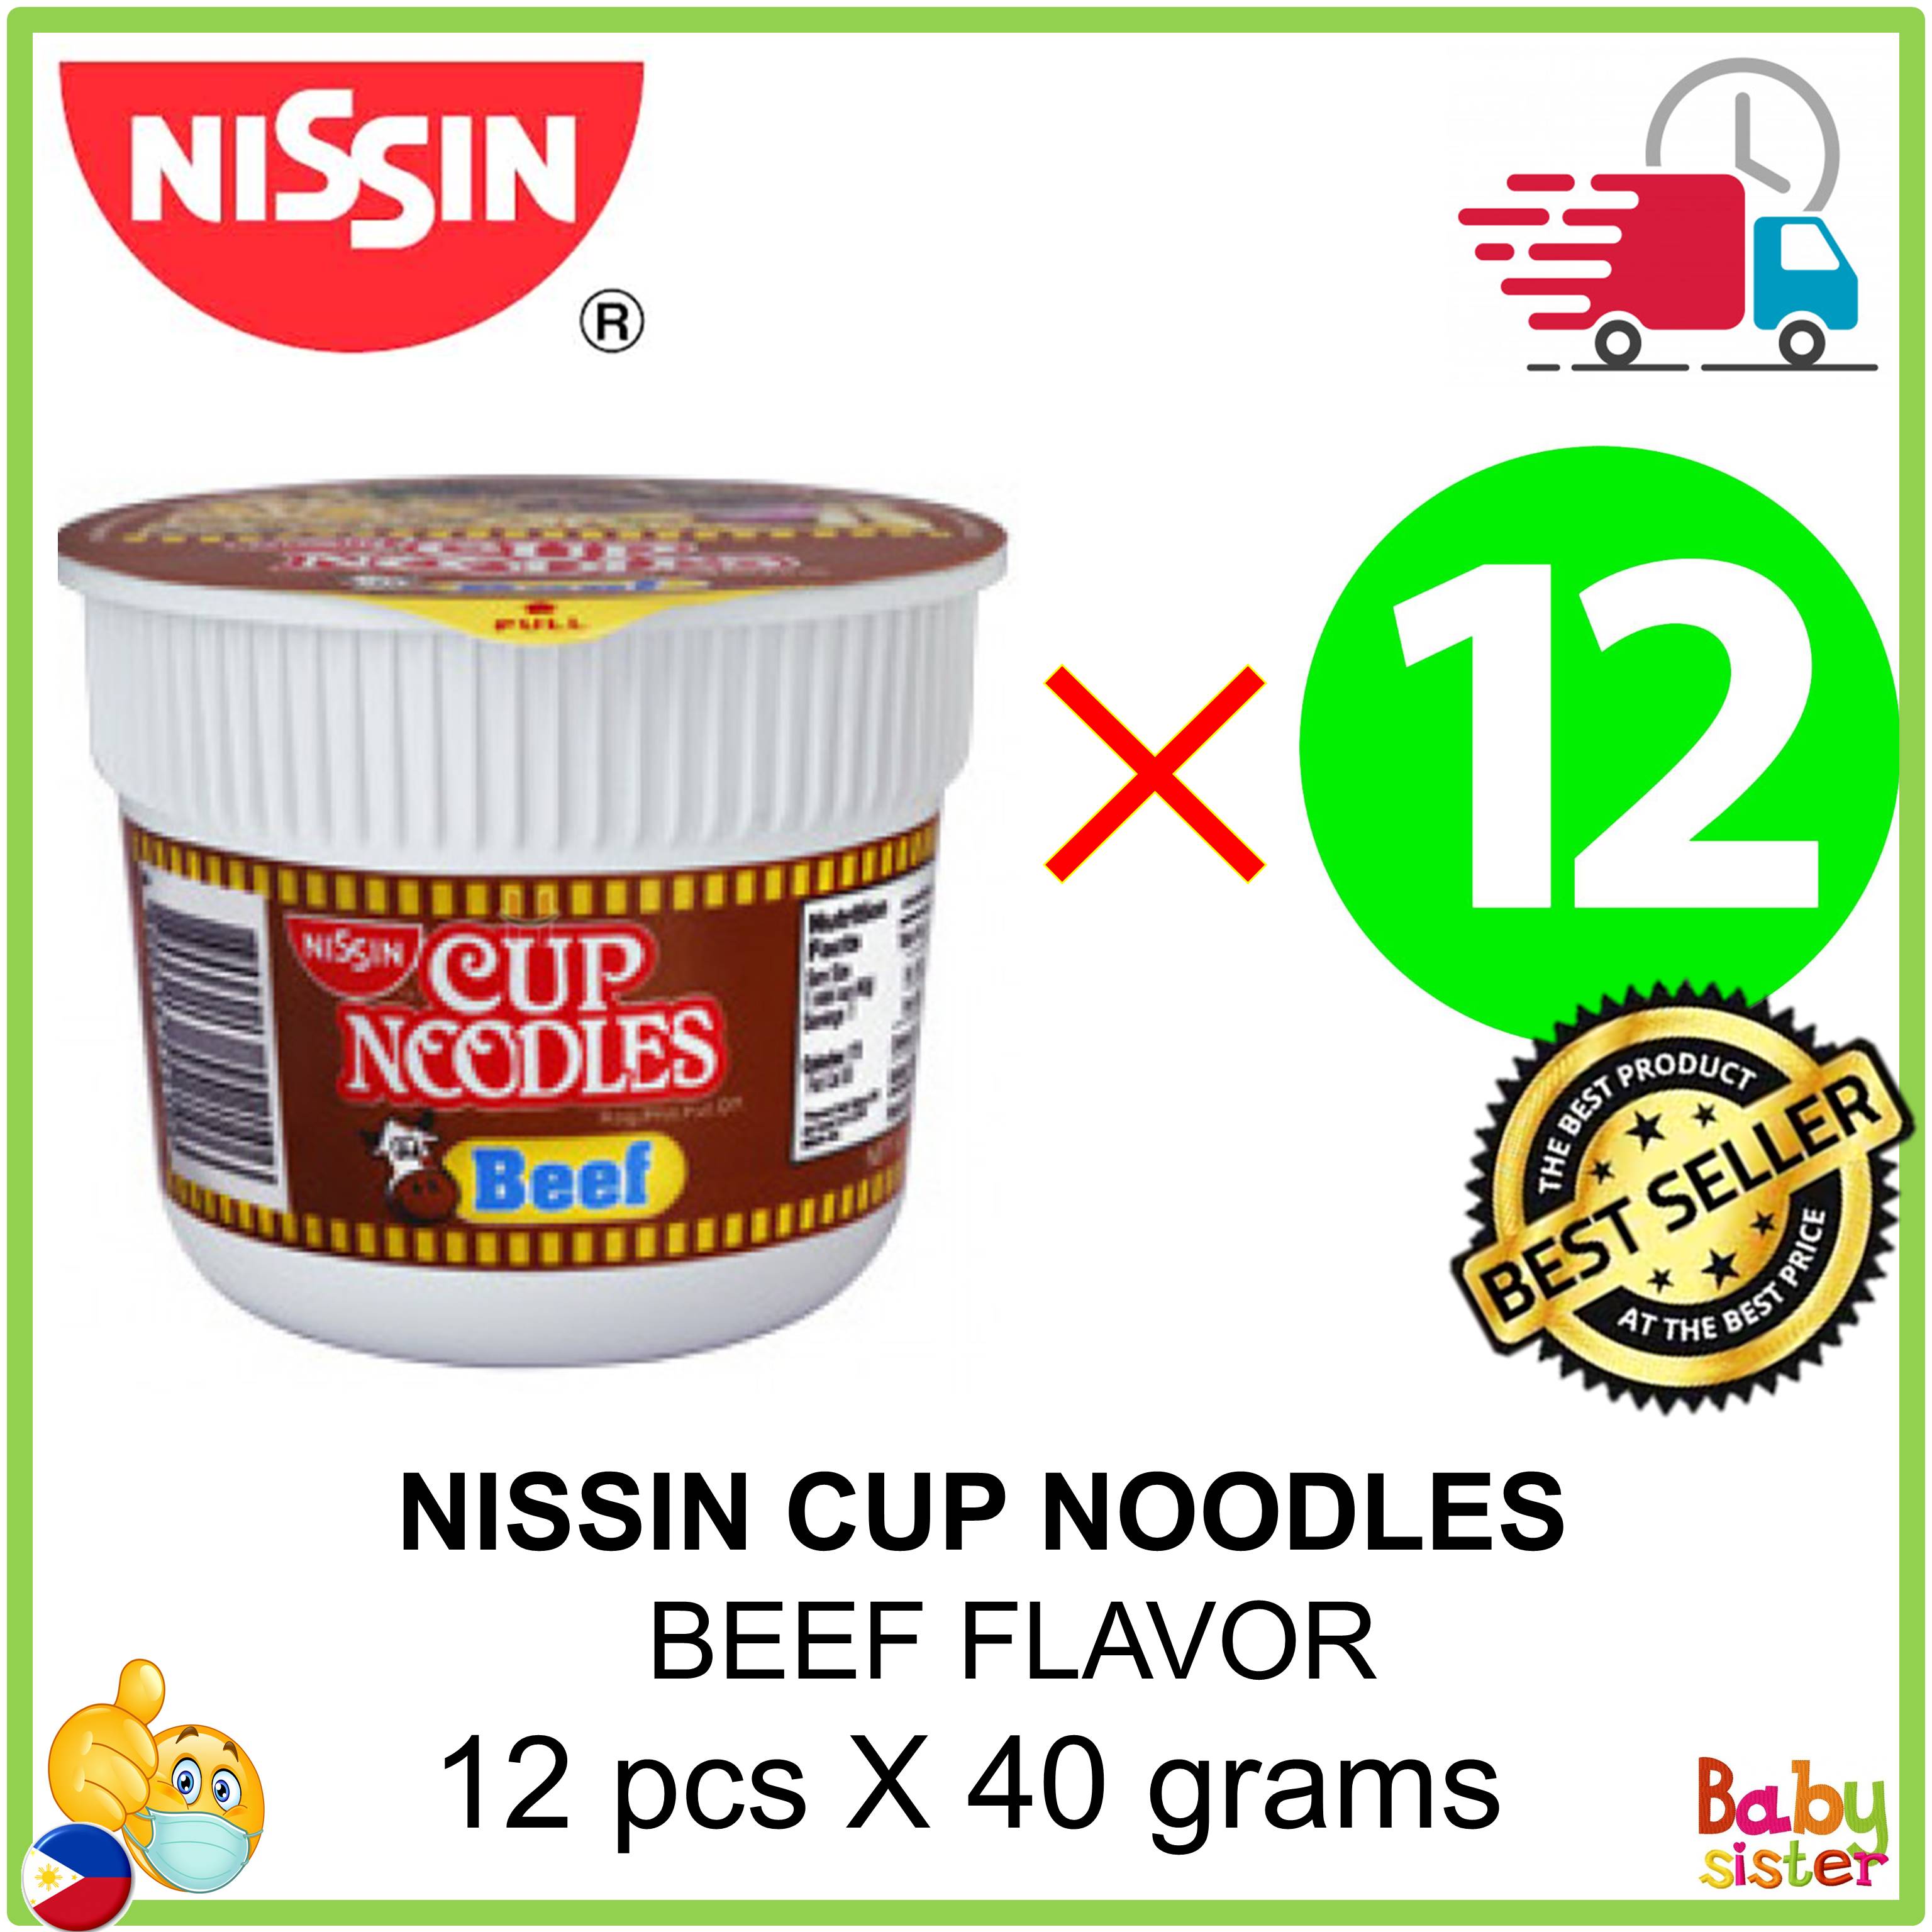 NISSIN CUP NOODLES BEEF FLAVOR 40 GRAMS X 12 PCS FROM BABY SISTER